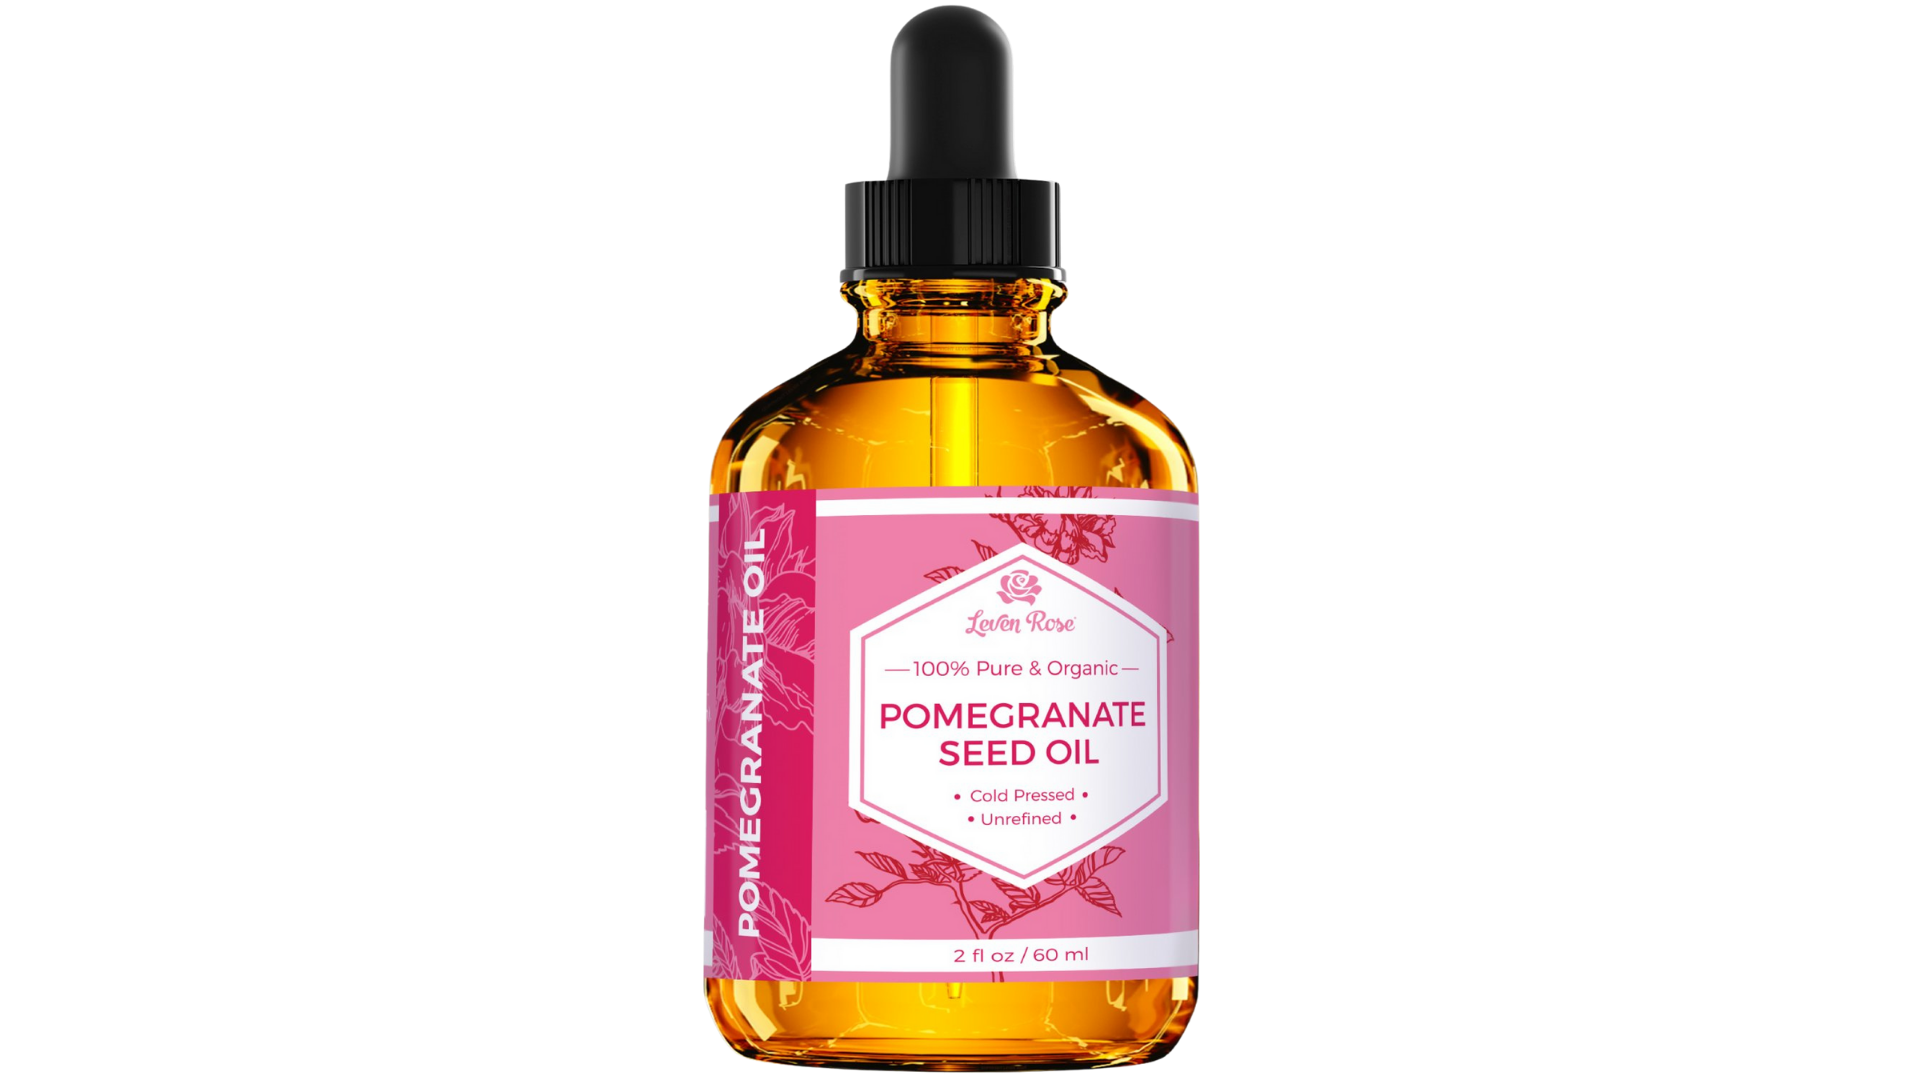 Leven Rose Pomegranate Seed Oil skin and hair